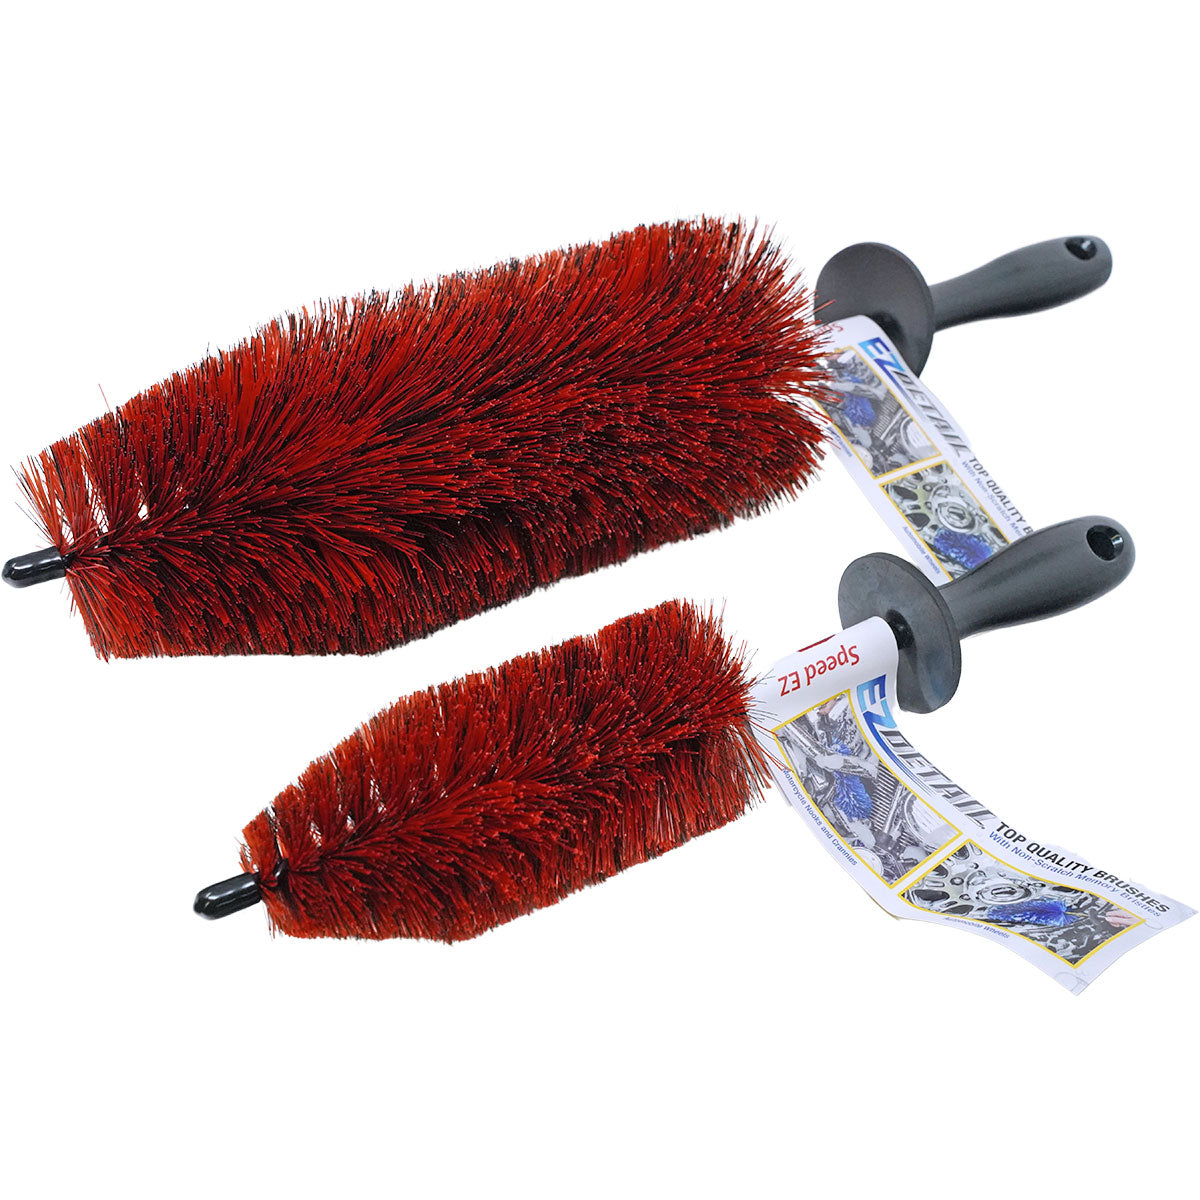 Wheel Brushes for Cleaning Wheels (4 Pro Pack)- 2X Soft Wheel Cleaning  Woolies Brush, Detailing Brush and Stiff Tire Brush, Scratch Free Durable  Car